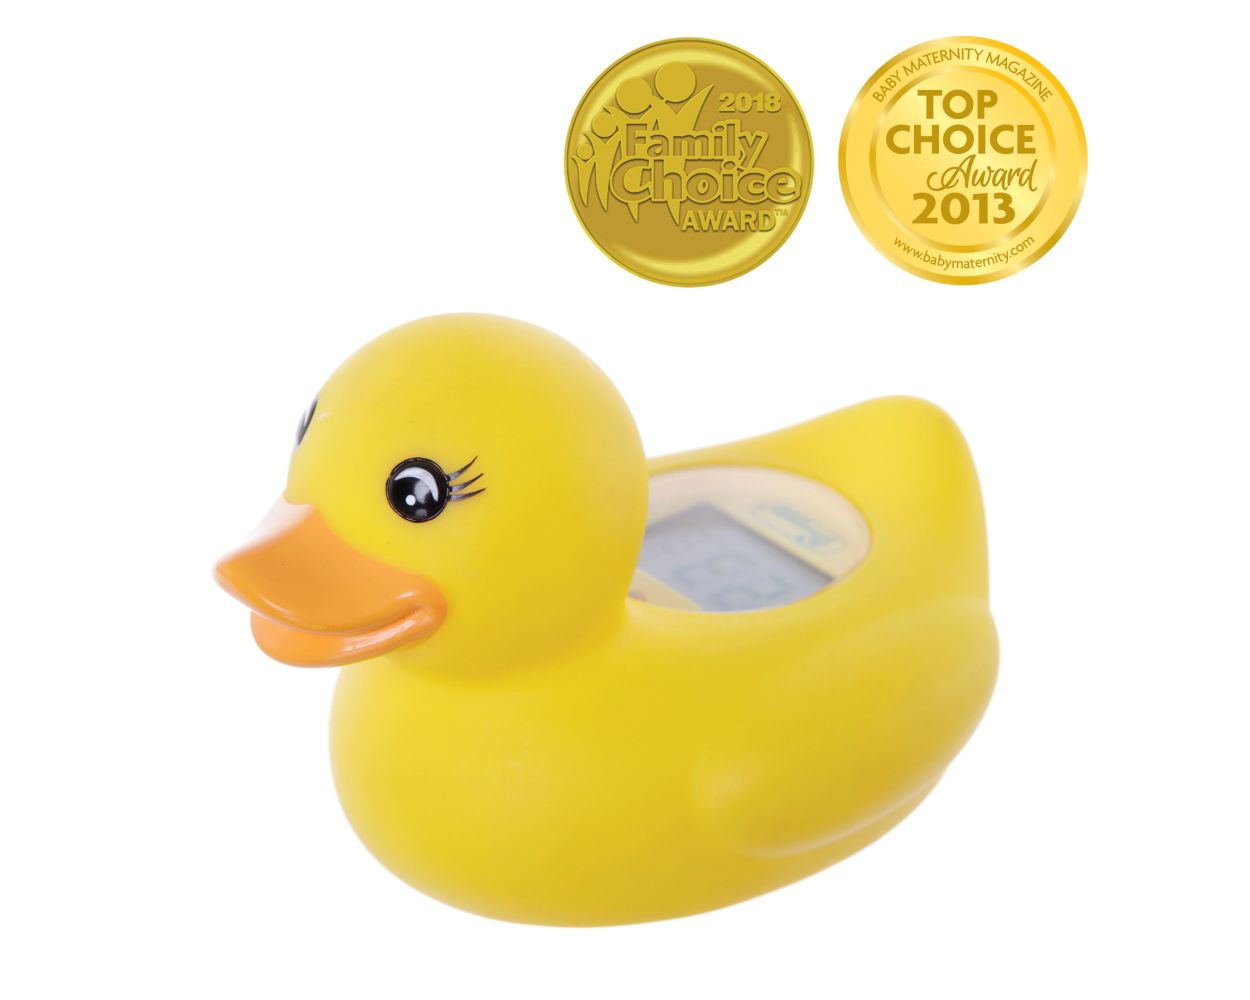 Dreambaby Bath & Room Thermometer Duck